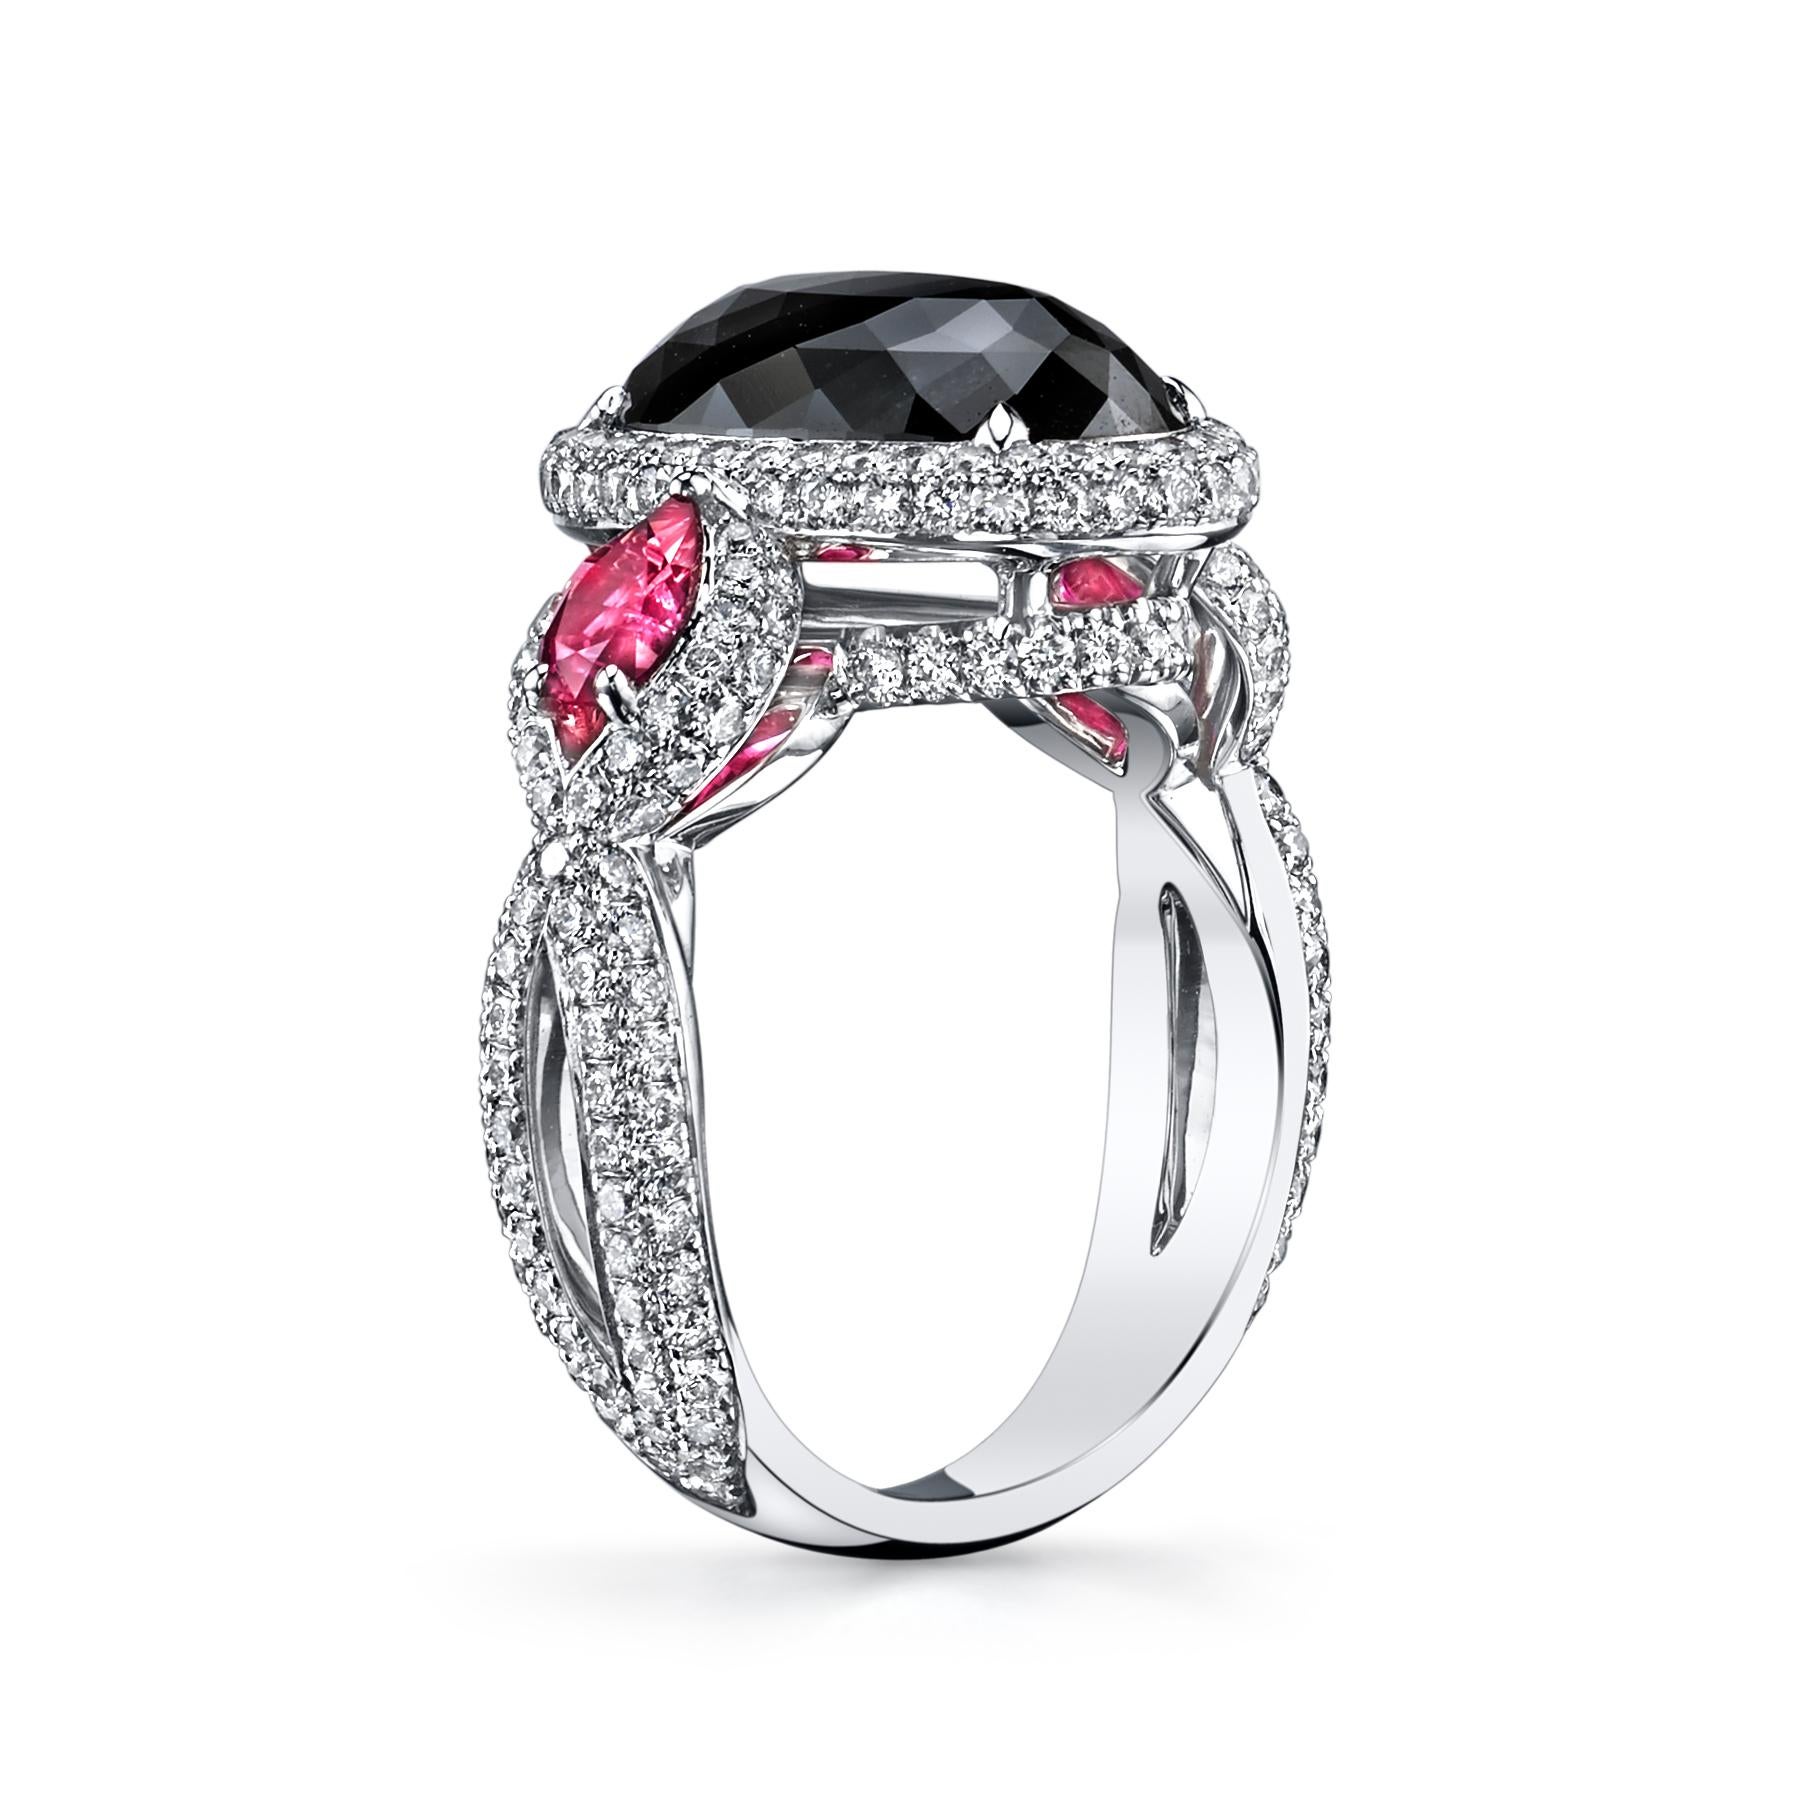 A very unique ring!

6.21ct Oval Fancy Black Natural Diamond with 2 MQ Natural Rubies totaling 1ct, surrounded by stunning natural round colorless diamonds.

This Diamond is GIA certified. 